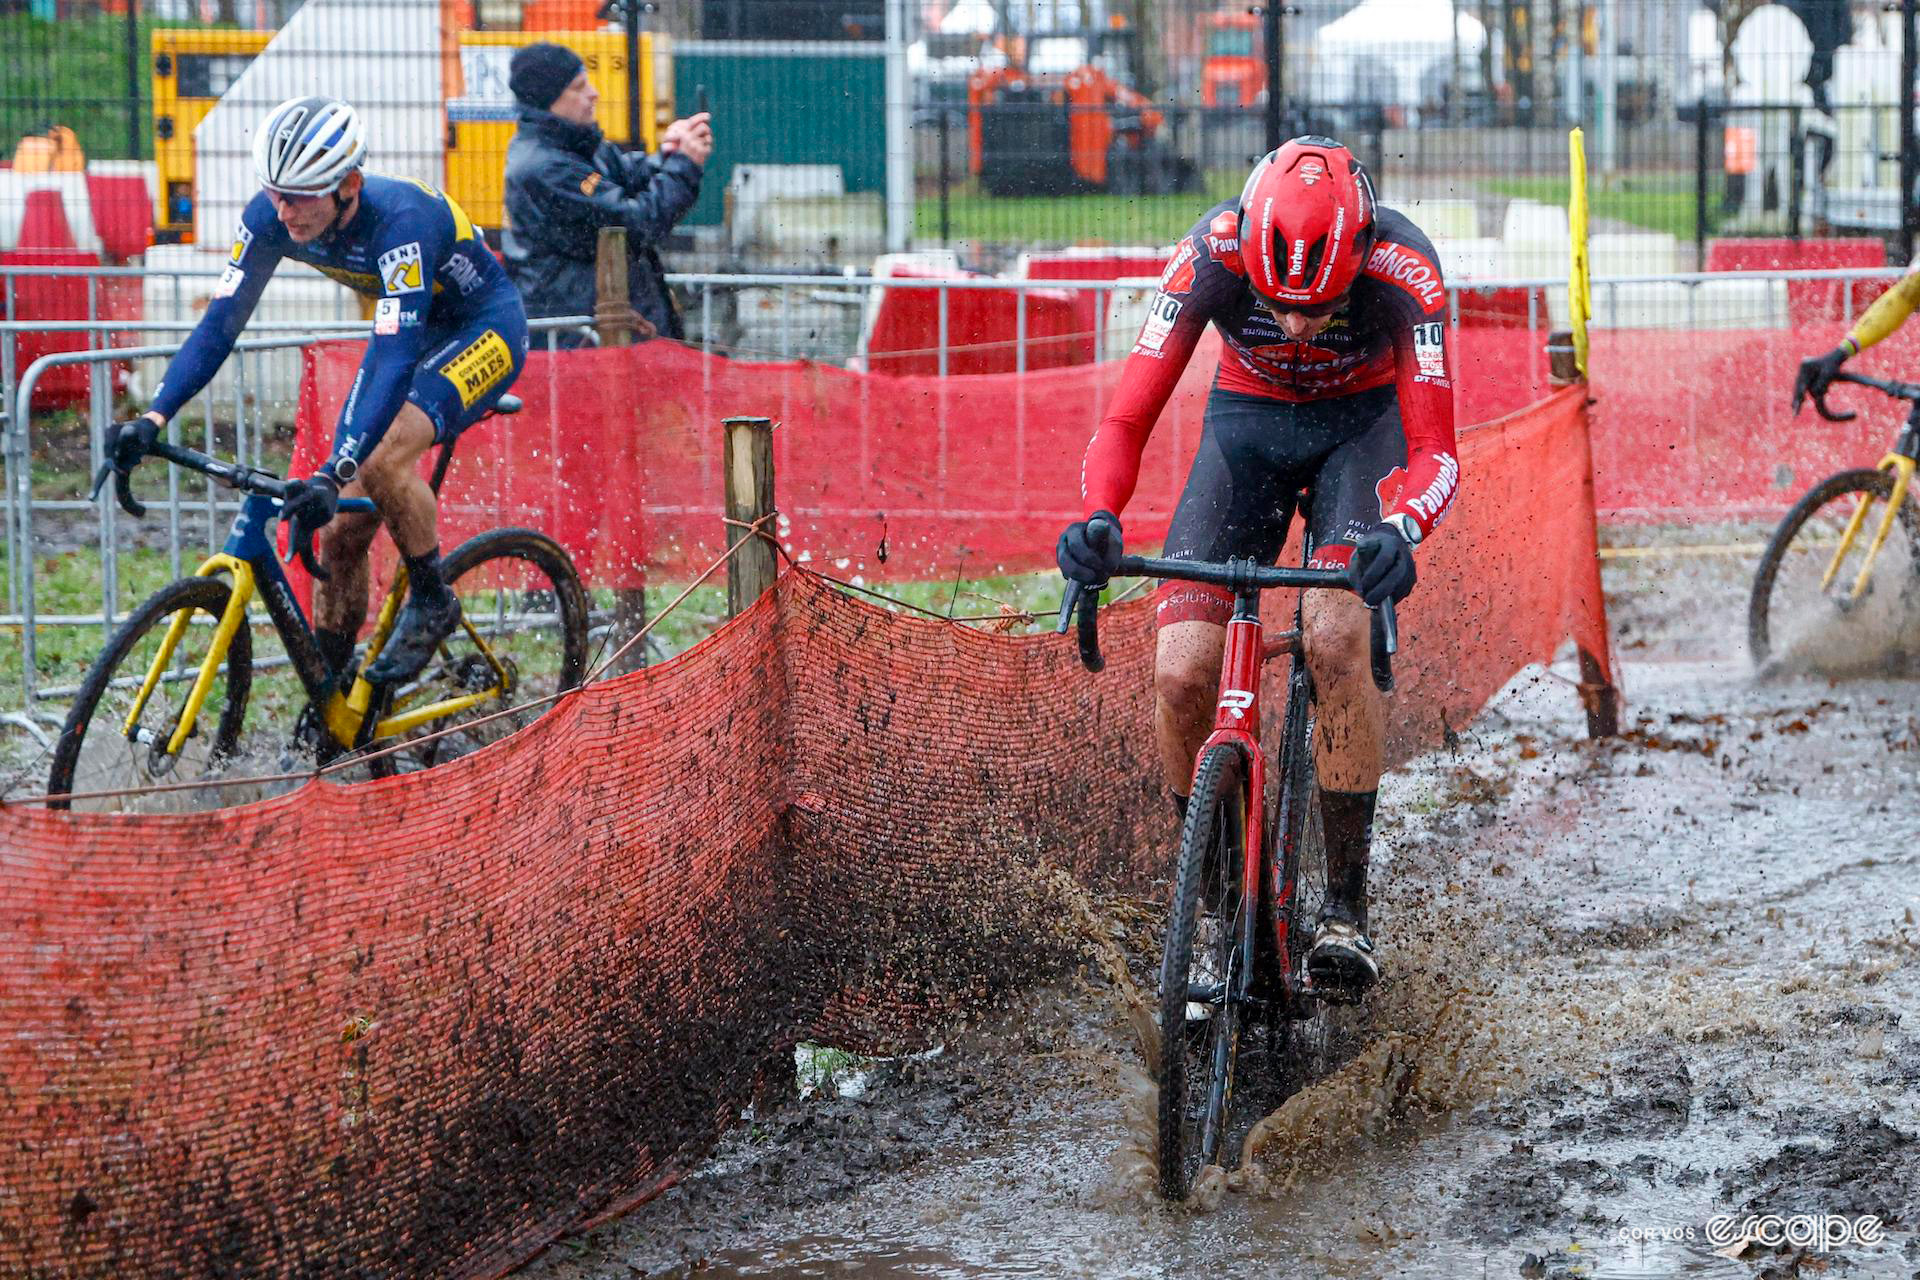 Yorben Lauryssen bypasses the pits as Victor van de Putte goes in for a bike change during a very wet and muddy Exact Cross Essen.